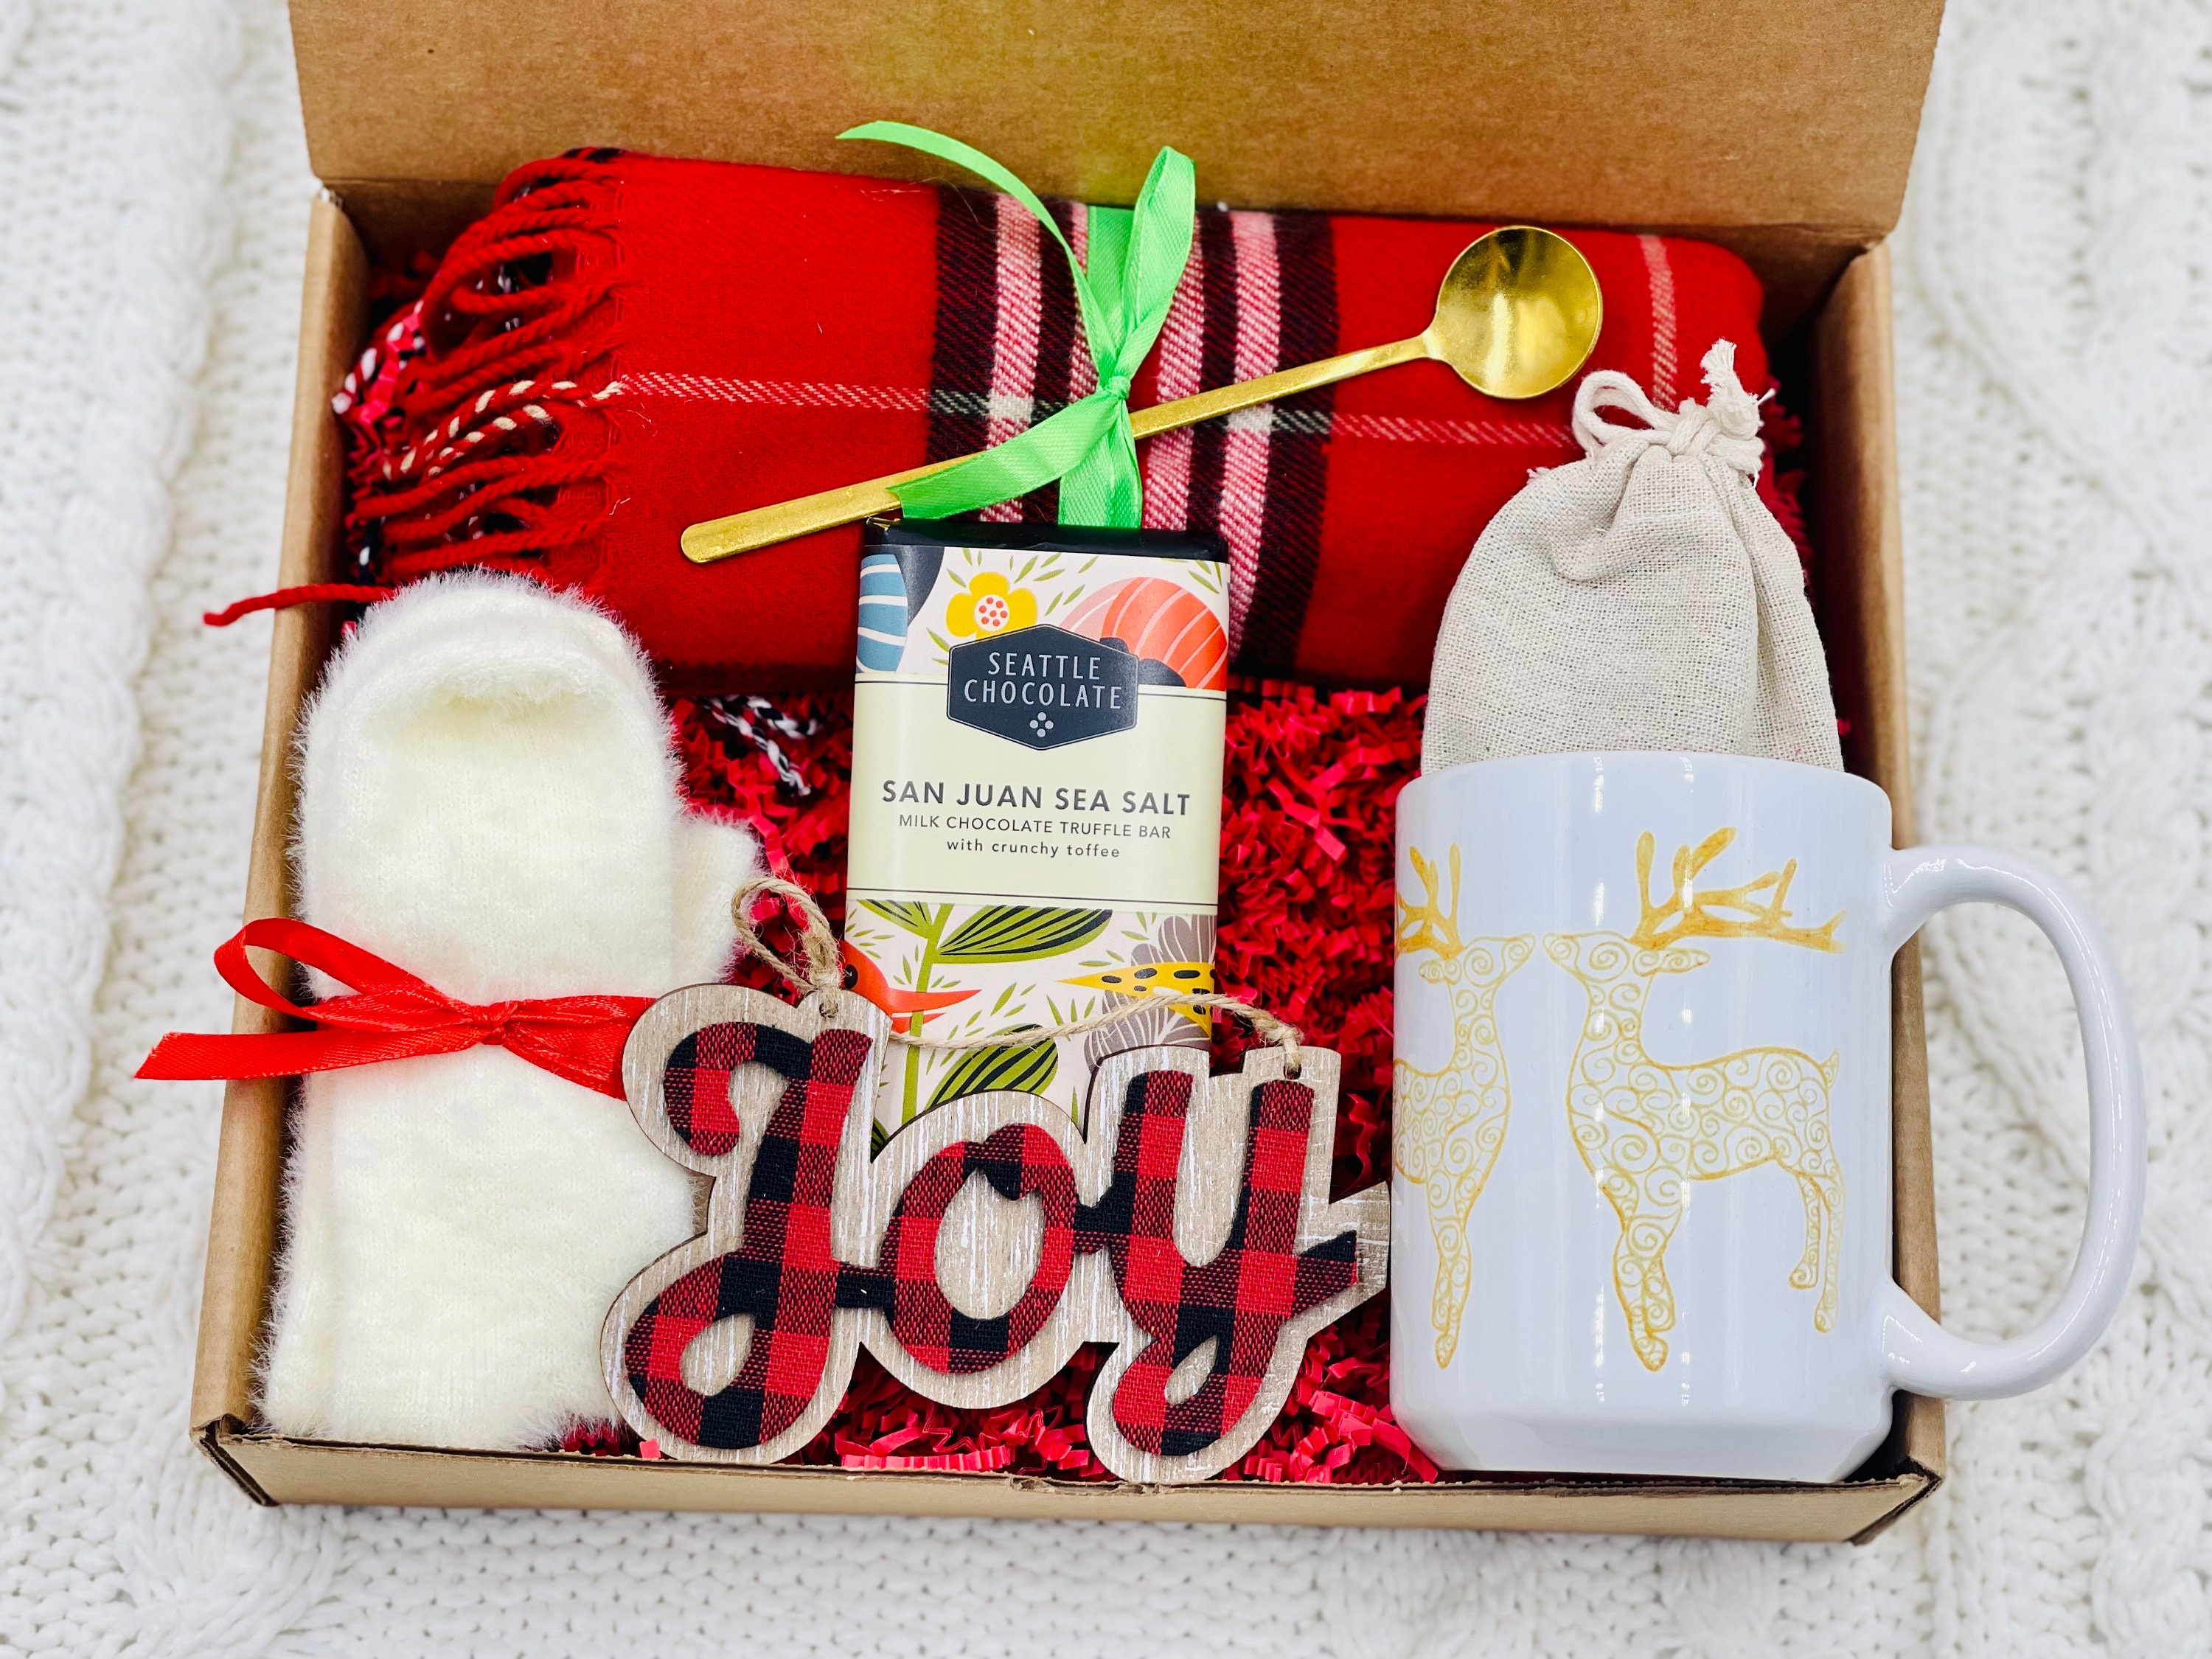 Christmas Gift for Men & Women  Hygge Holiday Gift Basket – Happy Hygge  Gifts